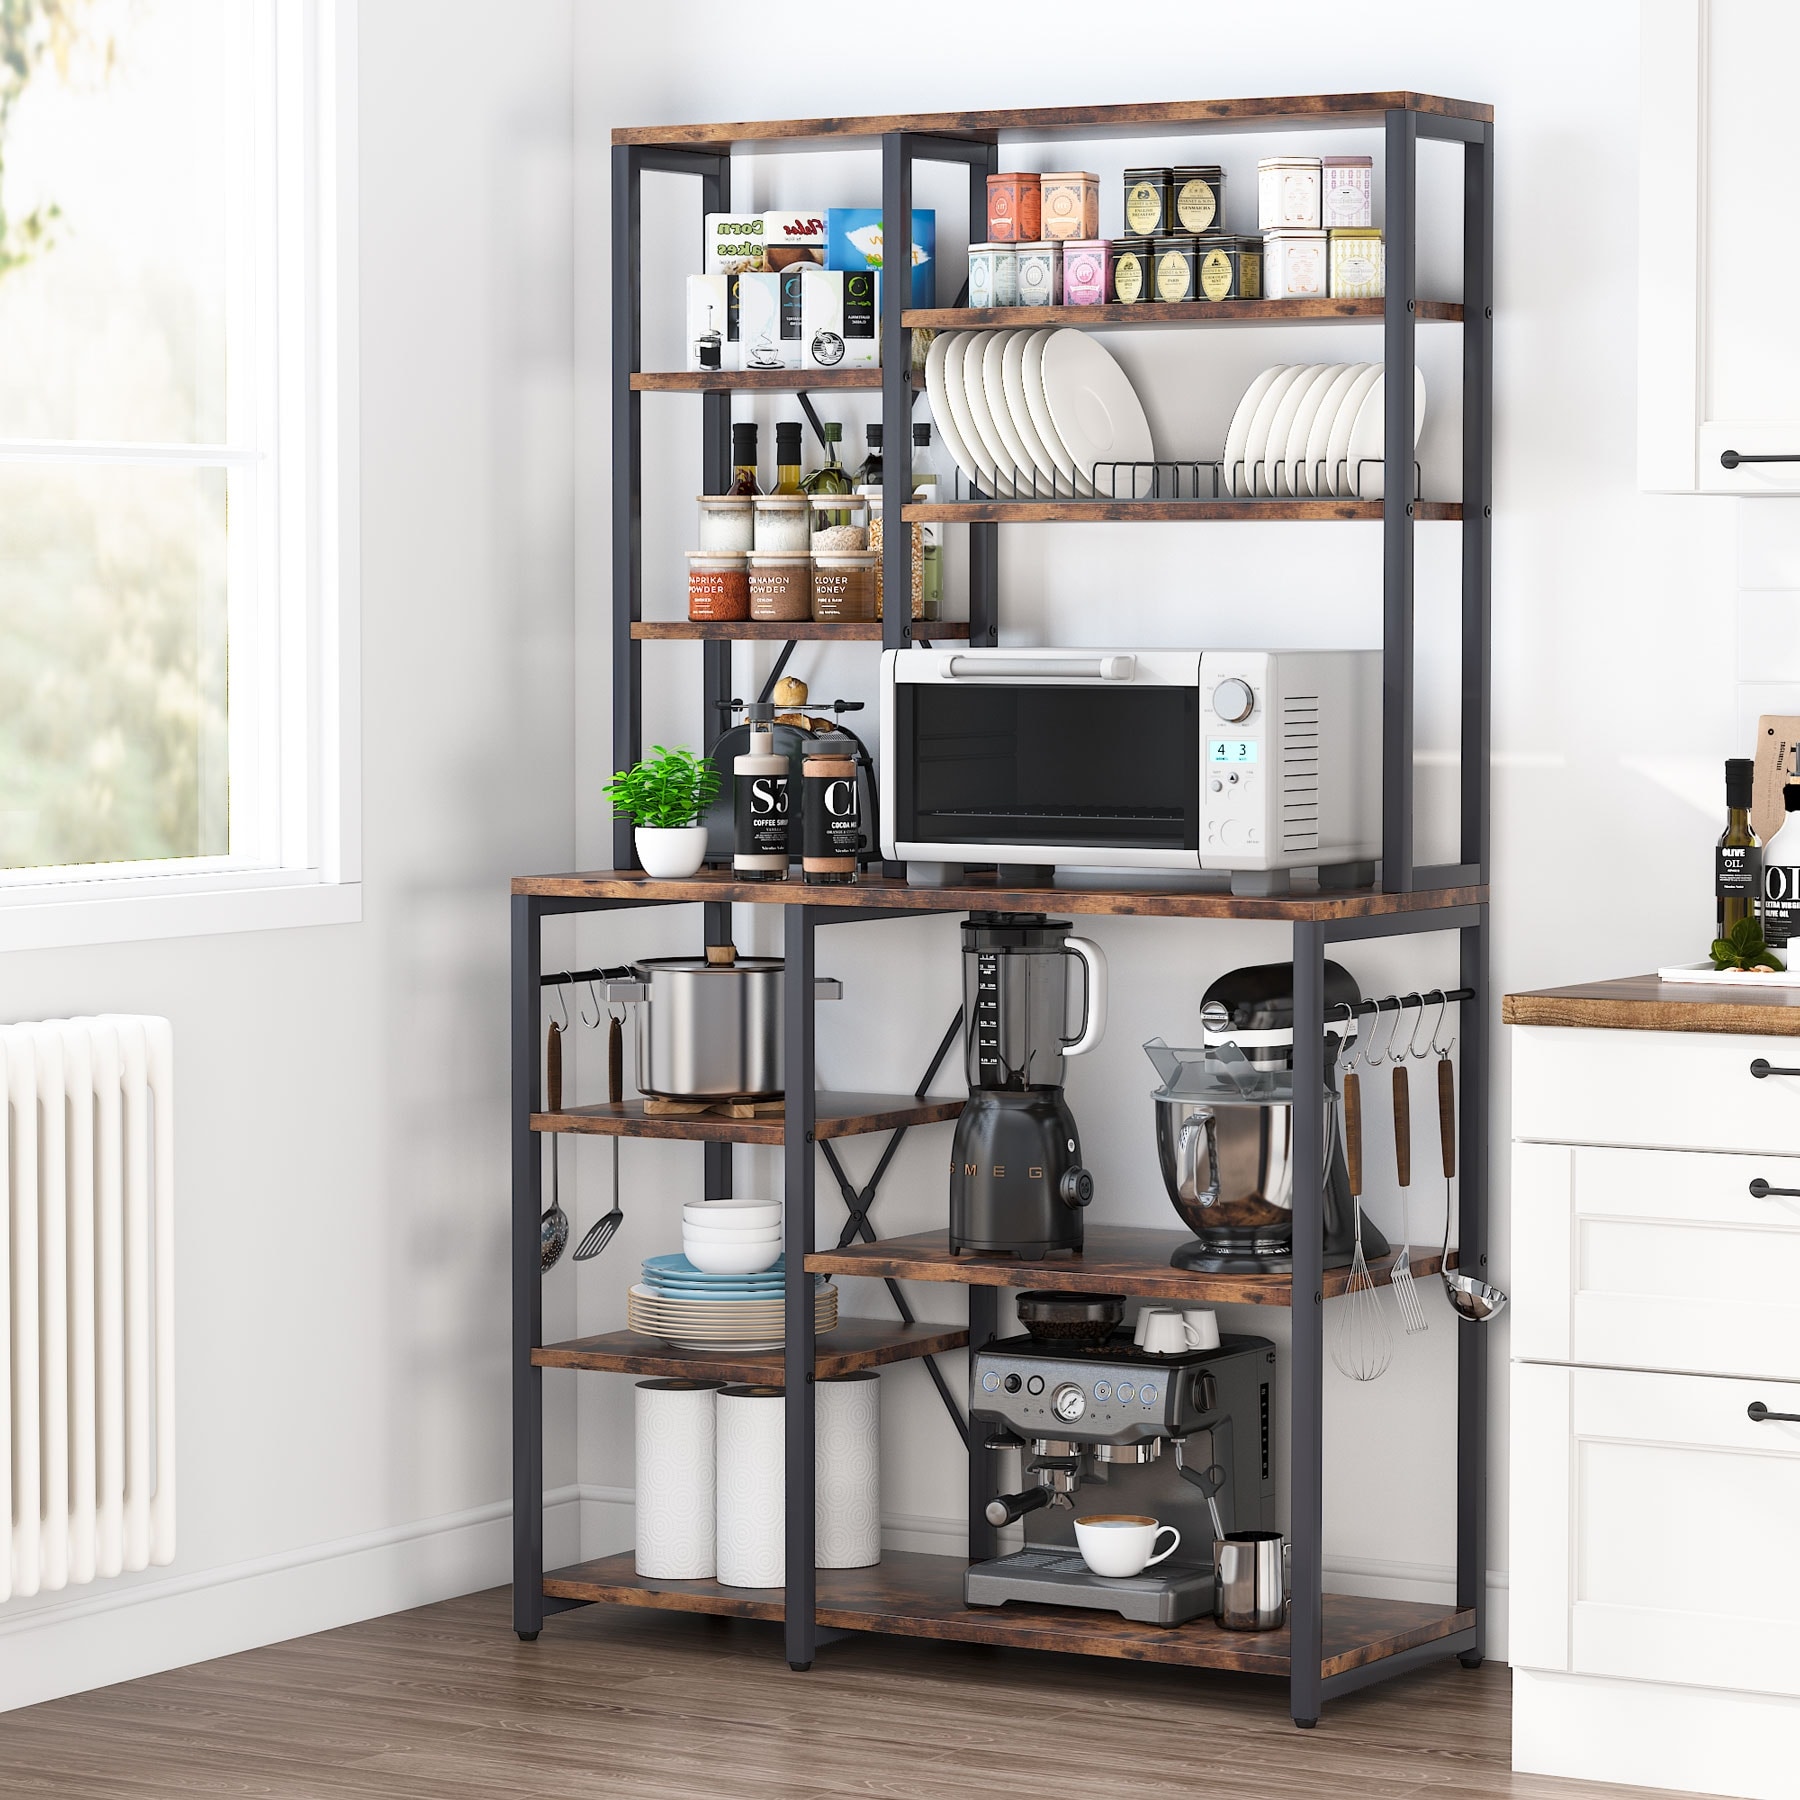 https://ak1.ostkcdn.com/images/products/is/images/direct/aaadaa5f161d6edf62d6bcde4dff9f8809ed79fa/Kitchen-Bakers-Rack-with-Hutch-and-Shelves%2C5-Tier-Kitchen-Utility-Storage-Shelf%2C-Display-Shelf.jpg